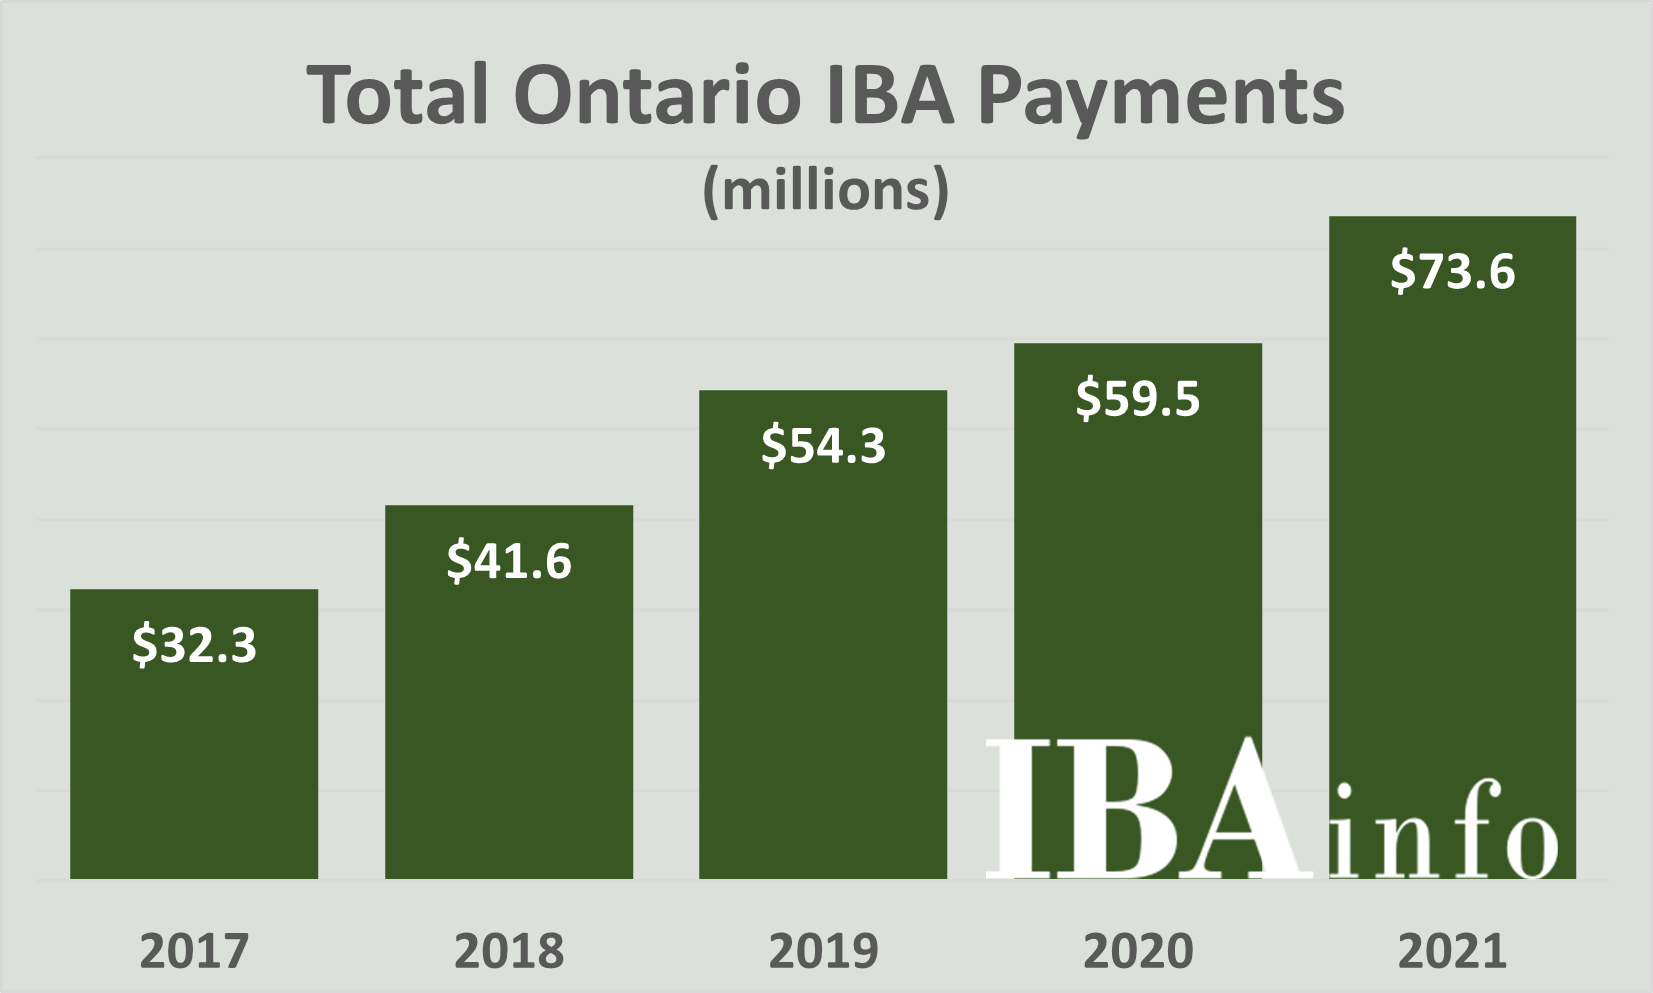 Ontario IBA Payments per year.